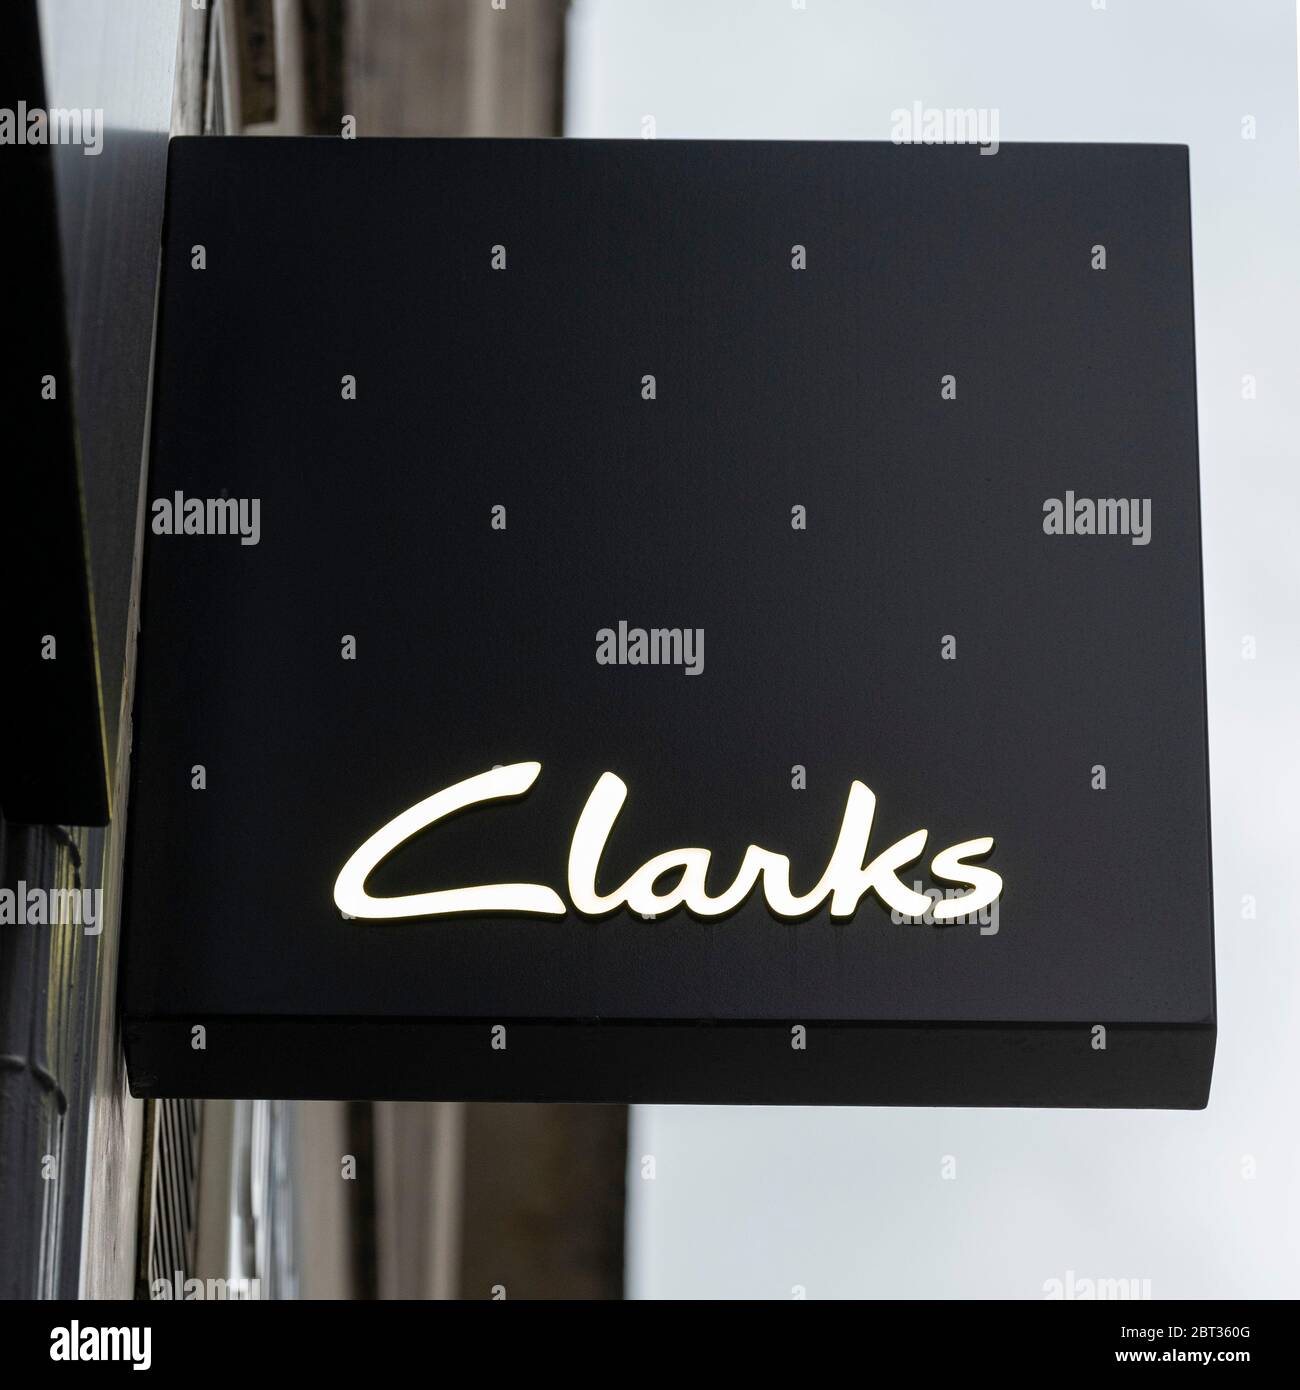 clarks shoes oxford street london